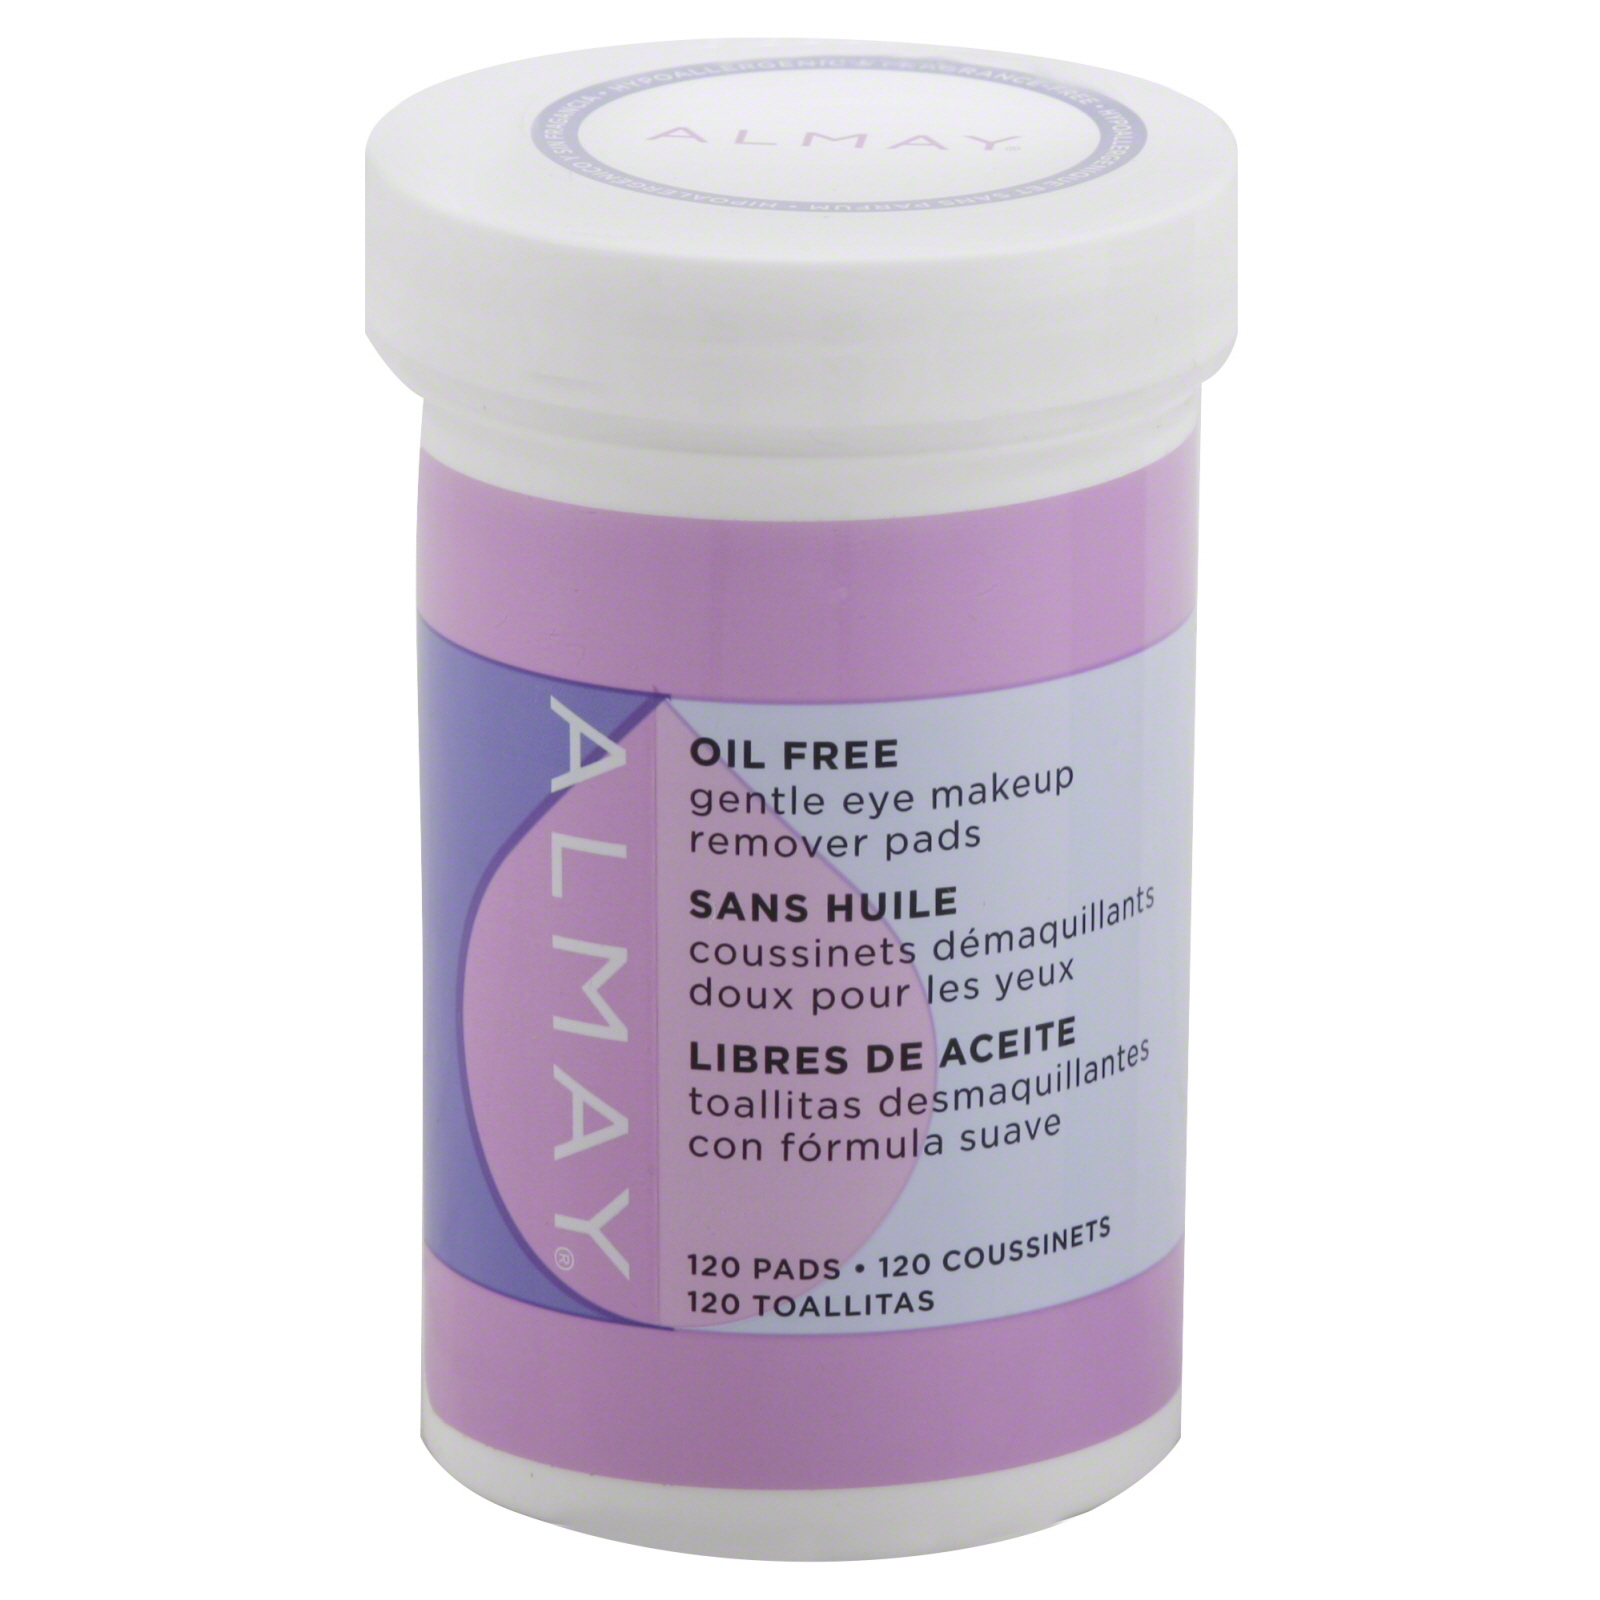 Almay Eye Makeup Remover Pads, Gentle, Oil Free, 120 ct